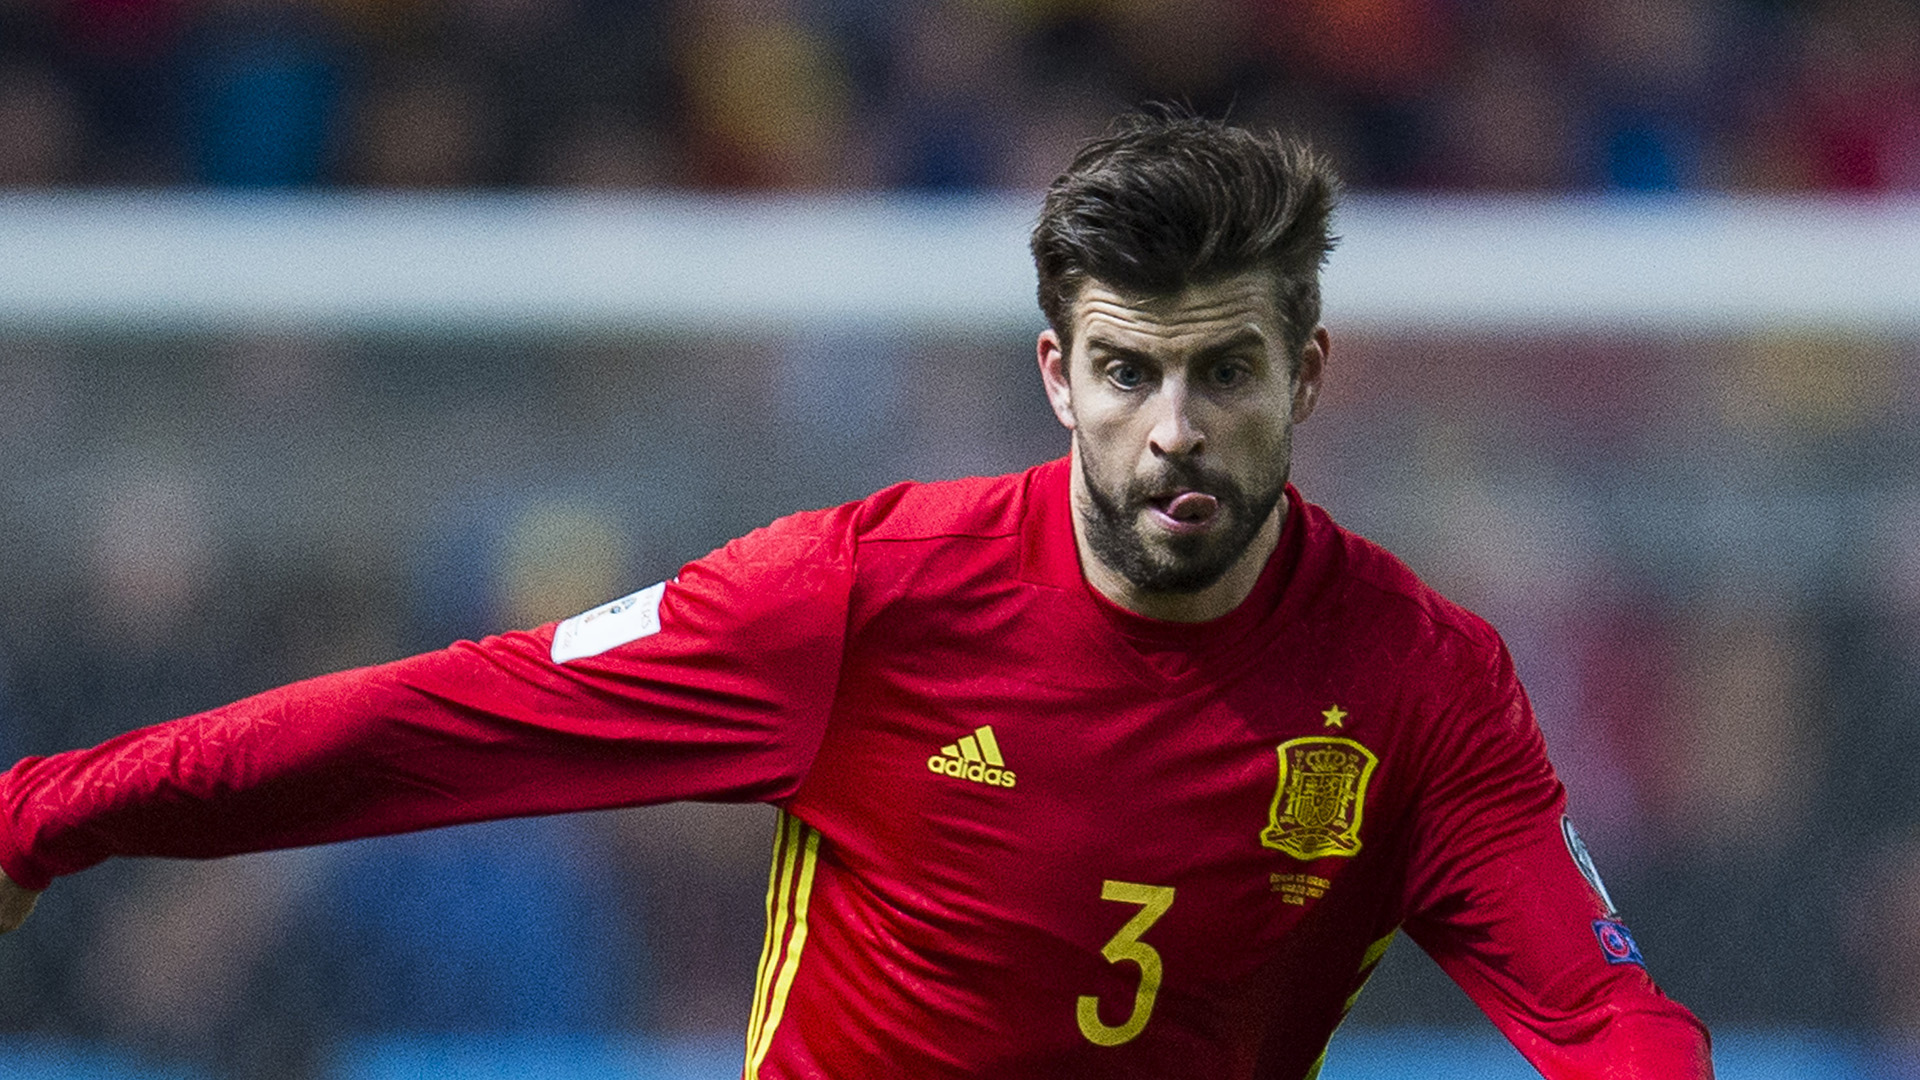 GIJON, SPAIN - MARCH 24: Gerard Pique of Spain controls the ball during the FIFA 2018 World Cup Qualifier between Spain and Israel at Estadio El Molinon on March 24, 2017 in Gijon, Spain. (Photo by Juan Manuel Serrano Arce/Getty Images)